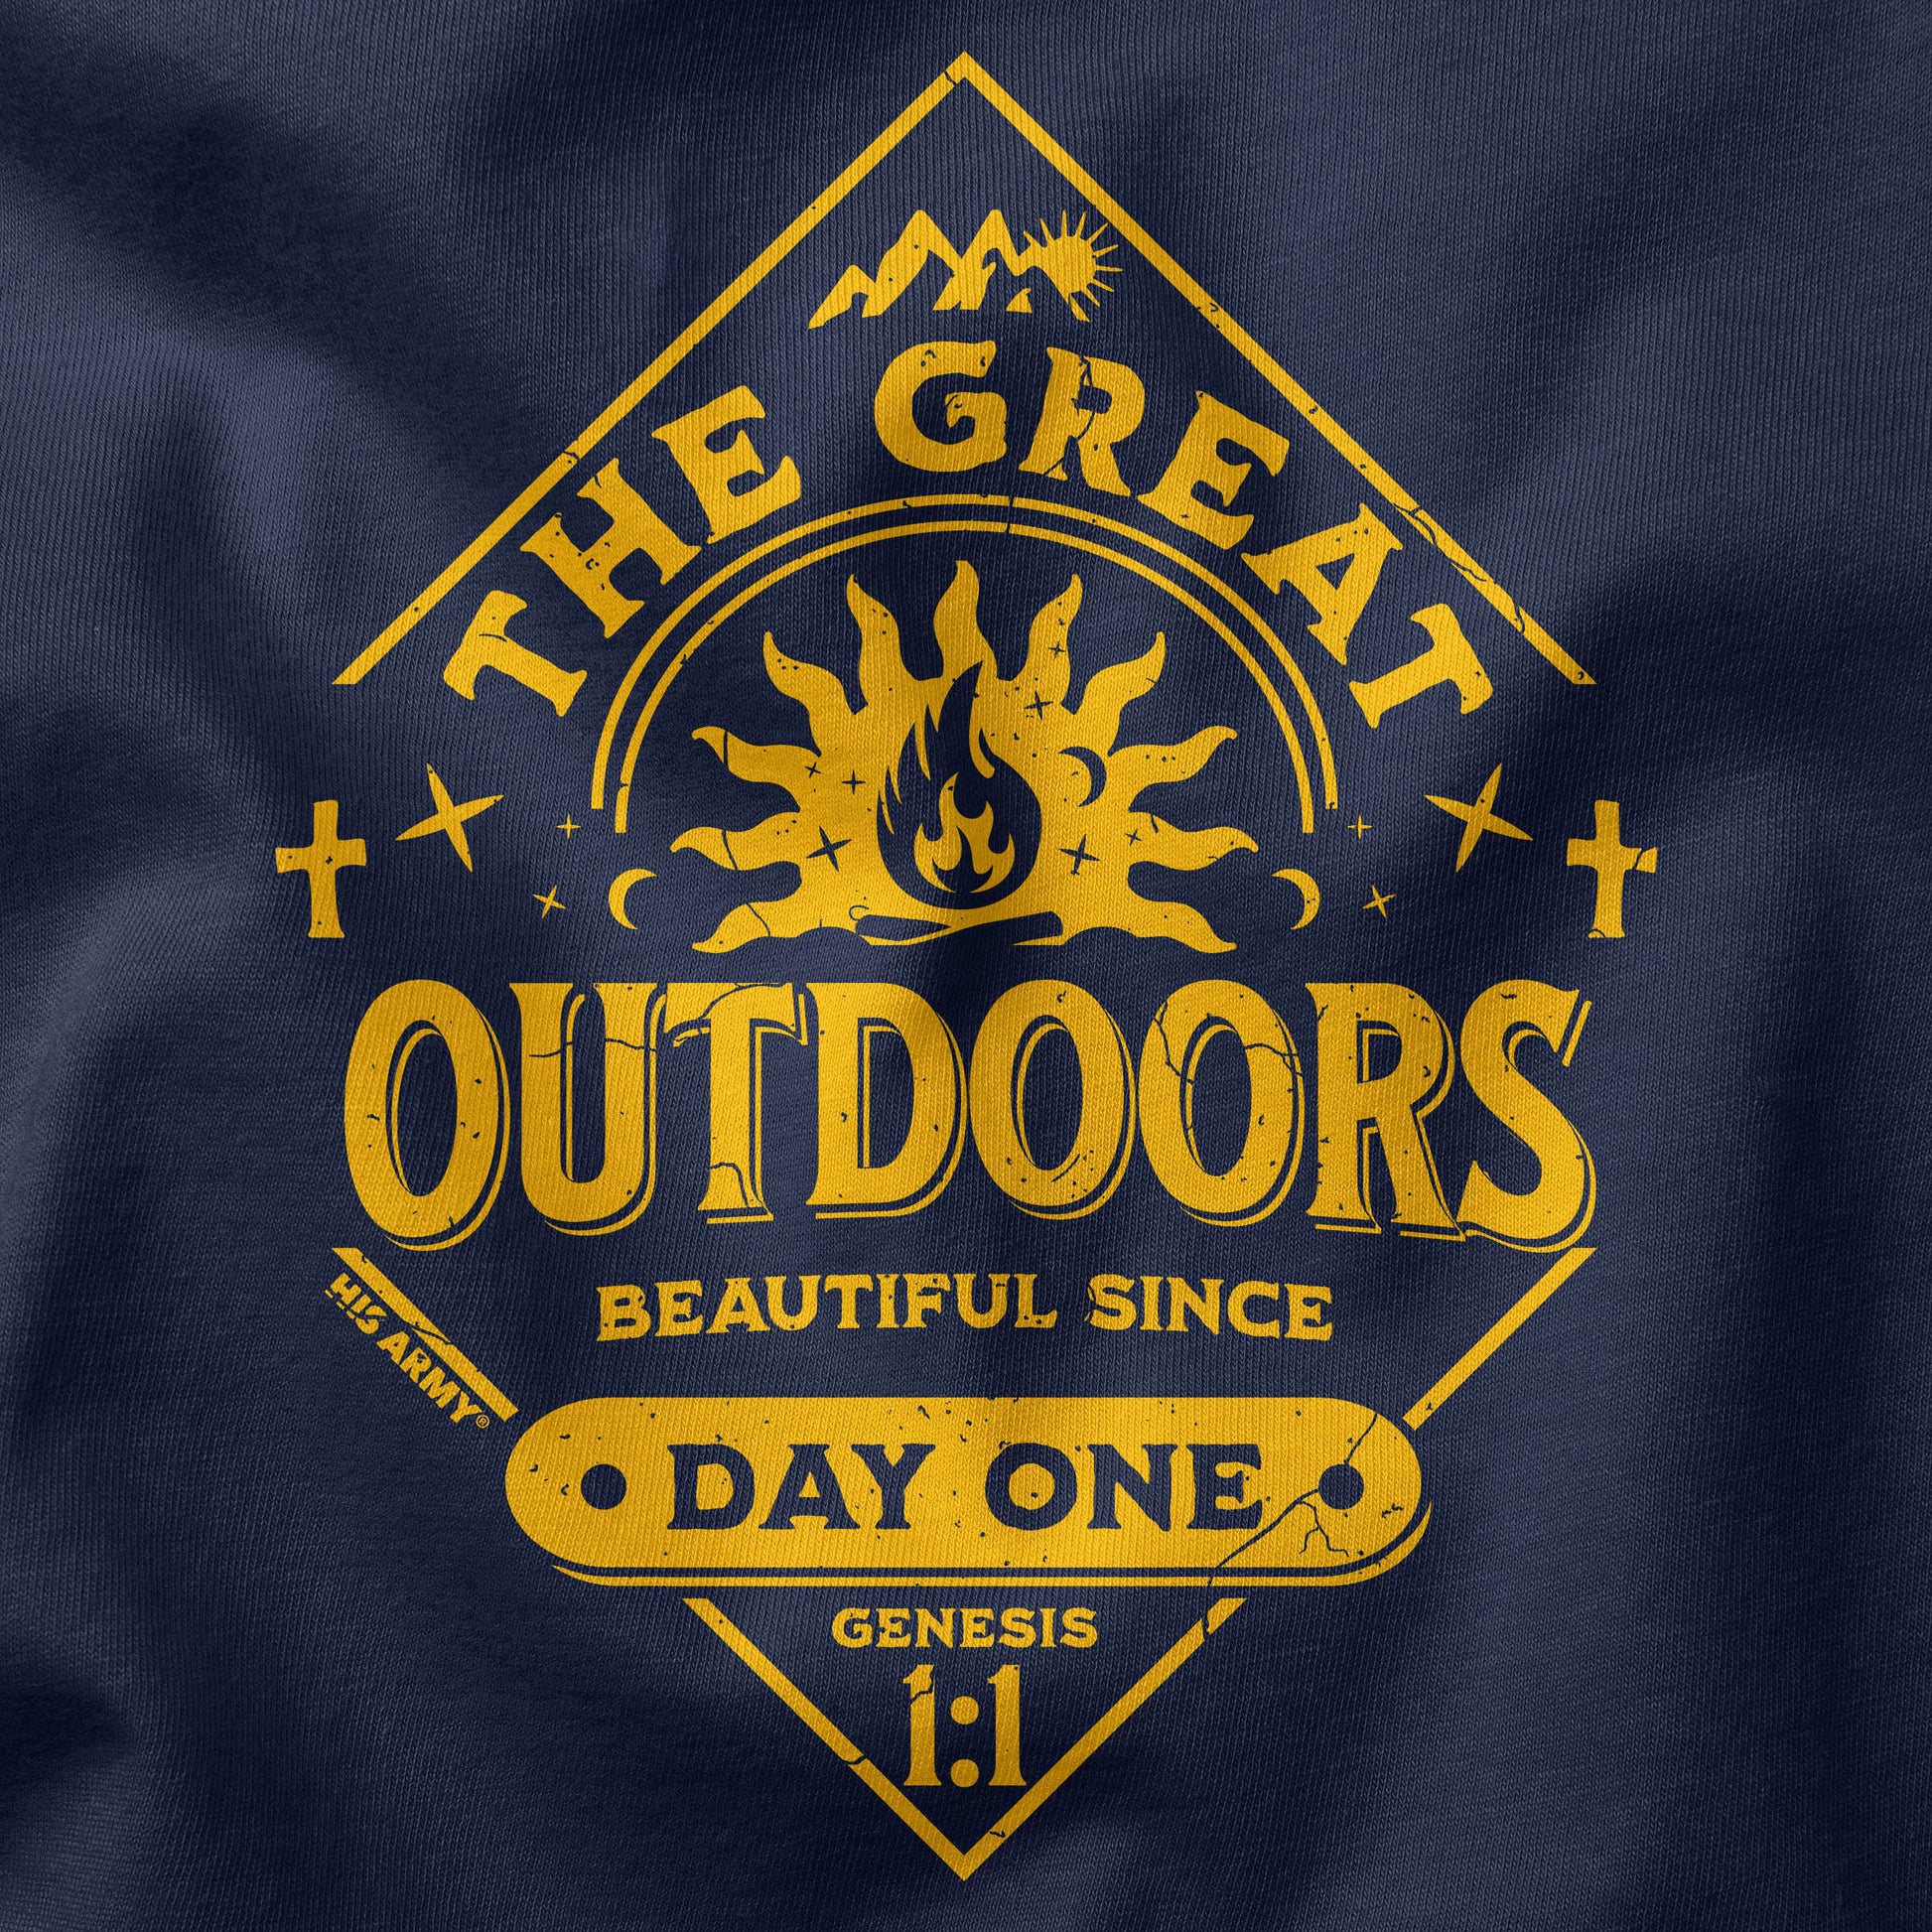 Closeup of Christian t-shirt design for outdoor lovers